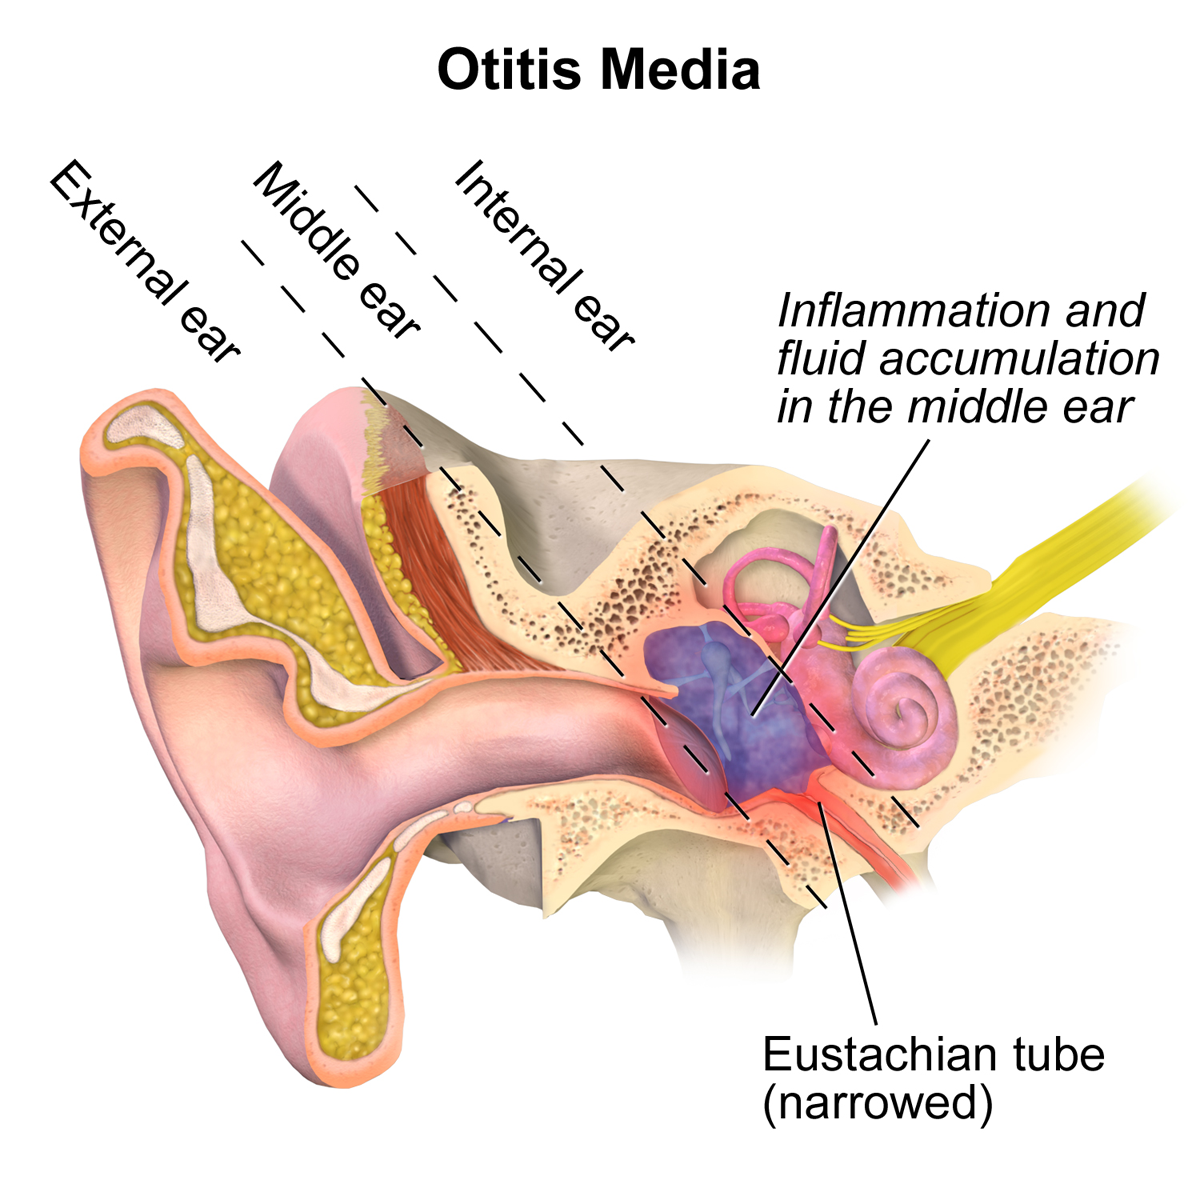 The ear during a case of otitis media